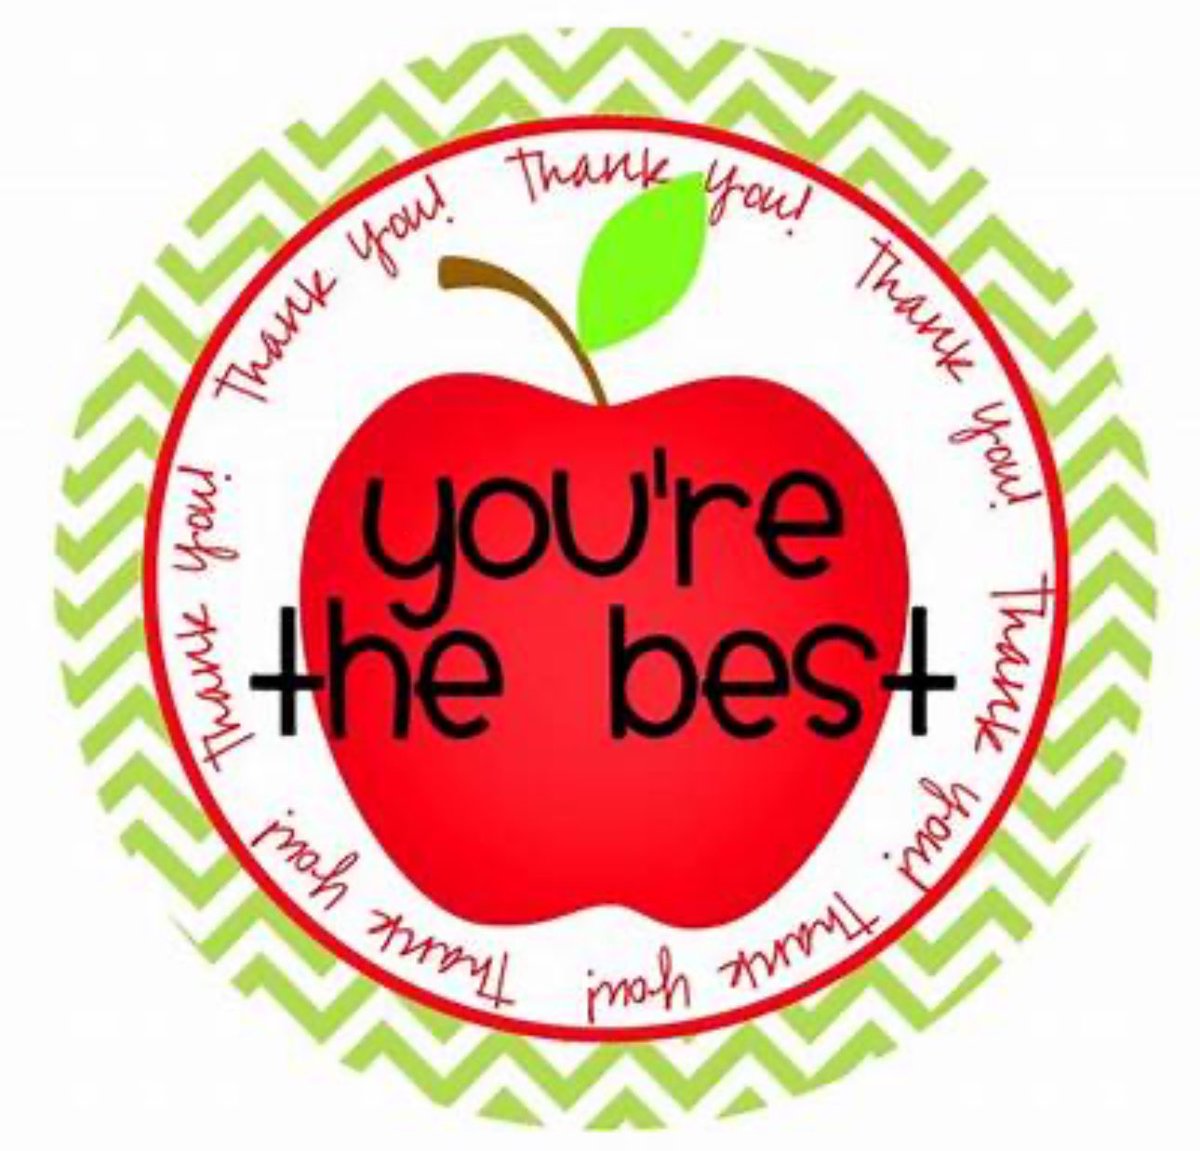 Happy Teacher Appreciation Week to all of my amazing teacher friends!!! You deserve to be celebrated & appreciated every day!!! Enjoy your week!